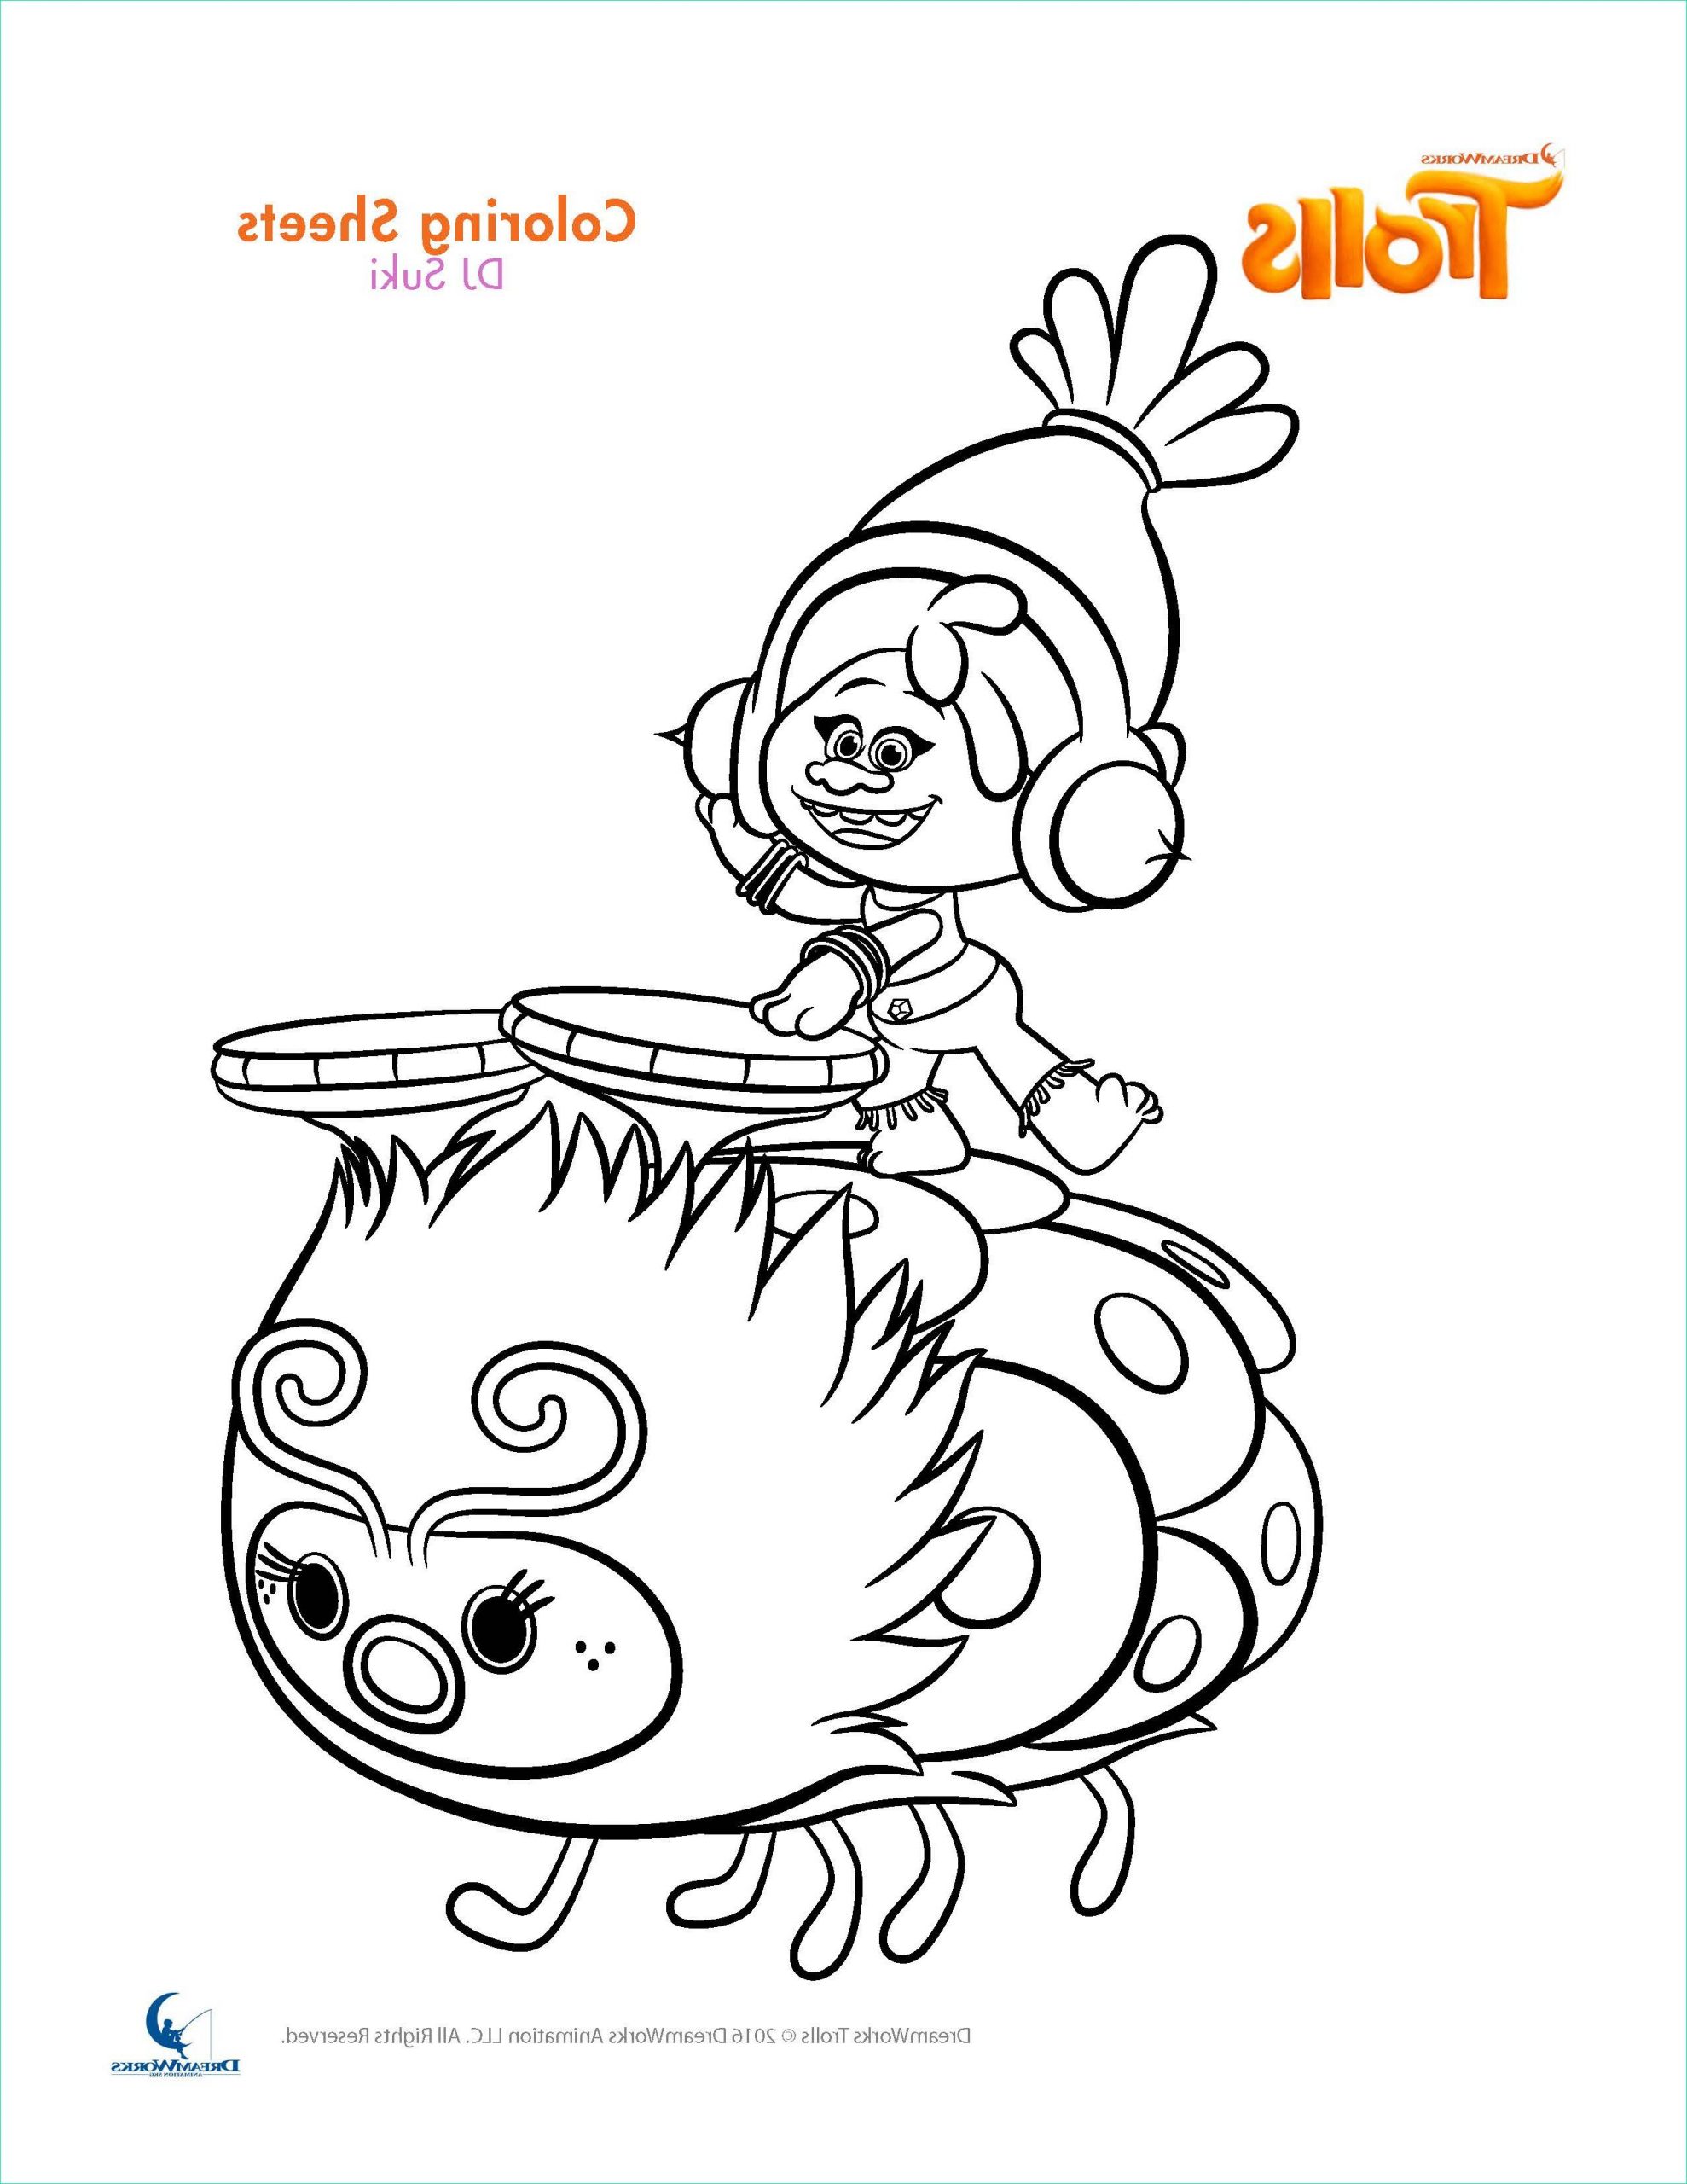 Dessin Trolls Bestof Stock Trolls Coloring Pages and Printable Activity Sheets and A